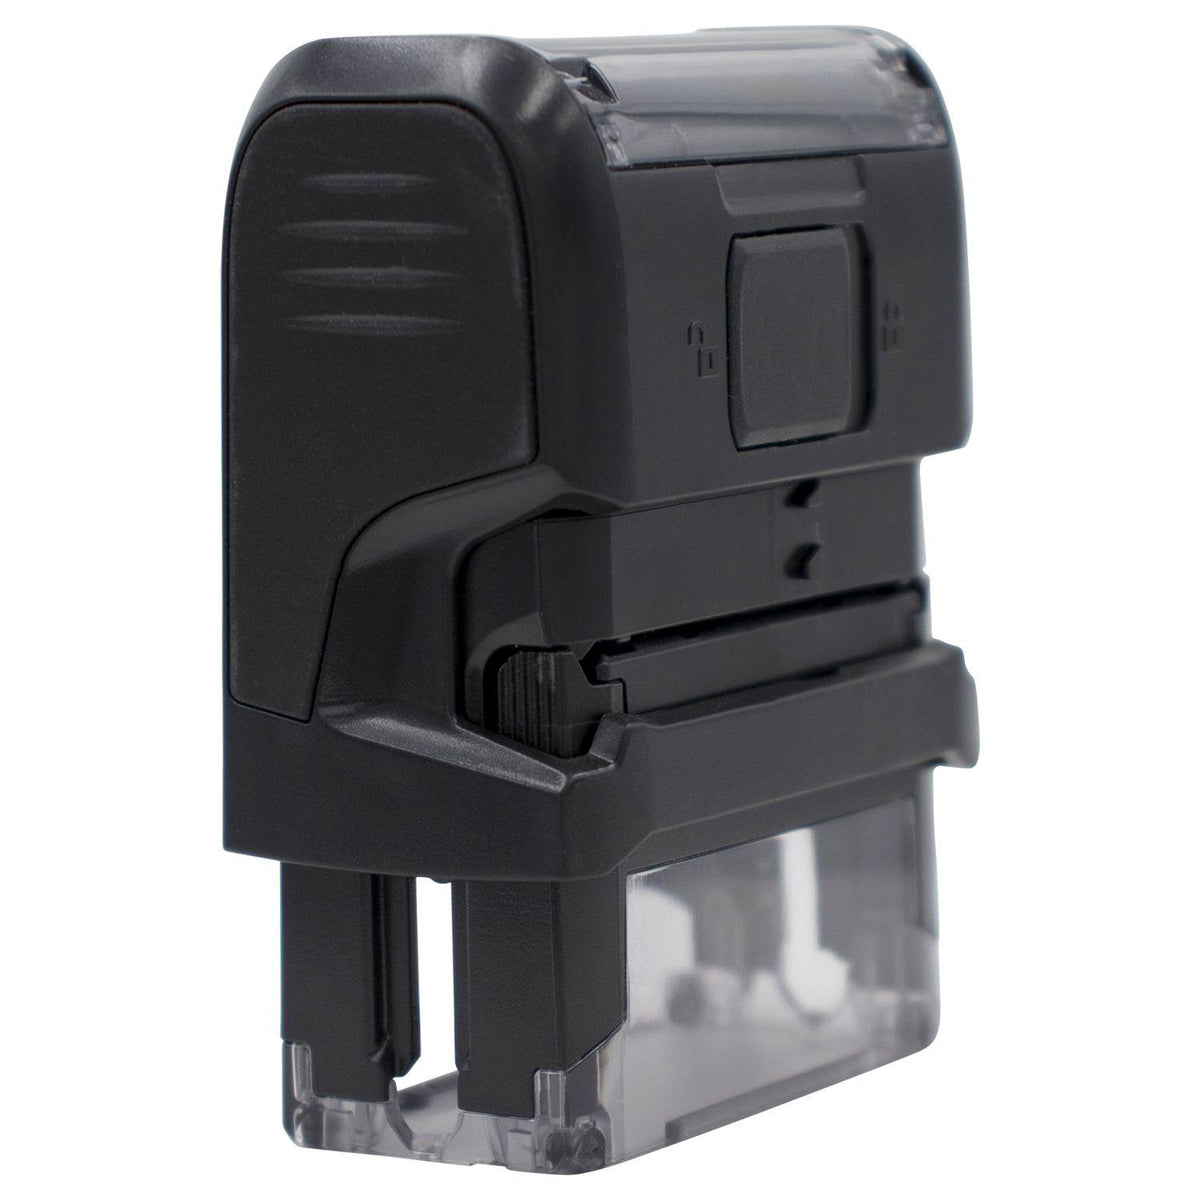 Self-Inking Void with X Stamp - Engineer Seal Stamps - Brand_Trodat, Impression Size_Small, Stamp Type_Self-Inking Stamp, Type of Use_General, Type of Use_Legal, Type of Use_Office